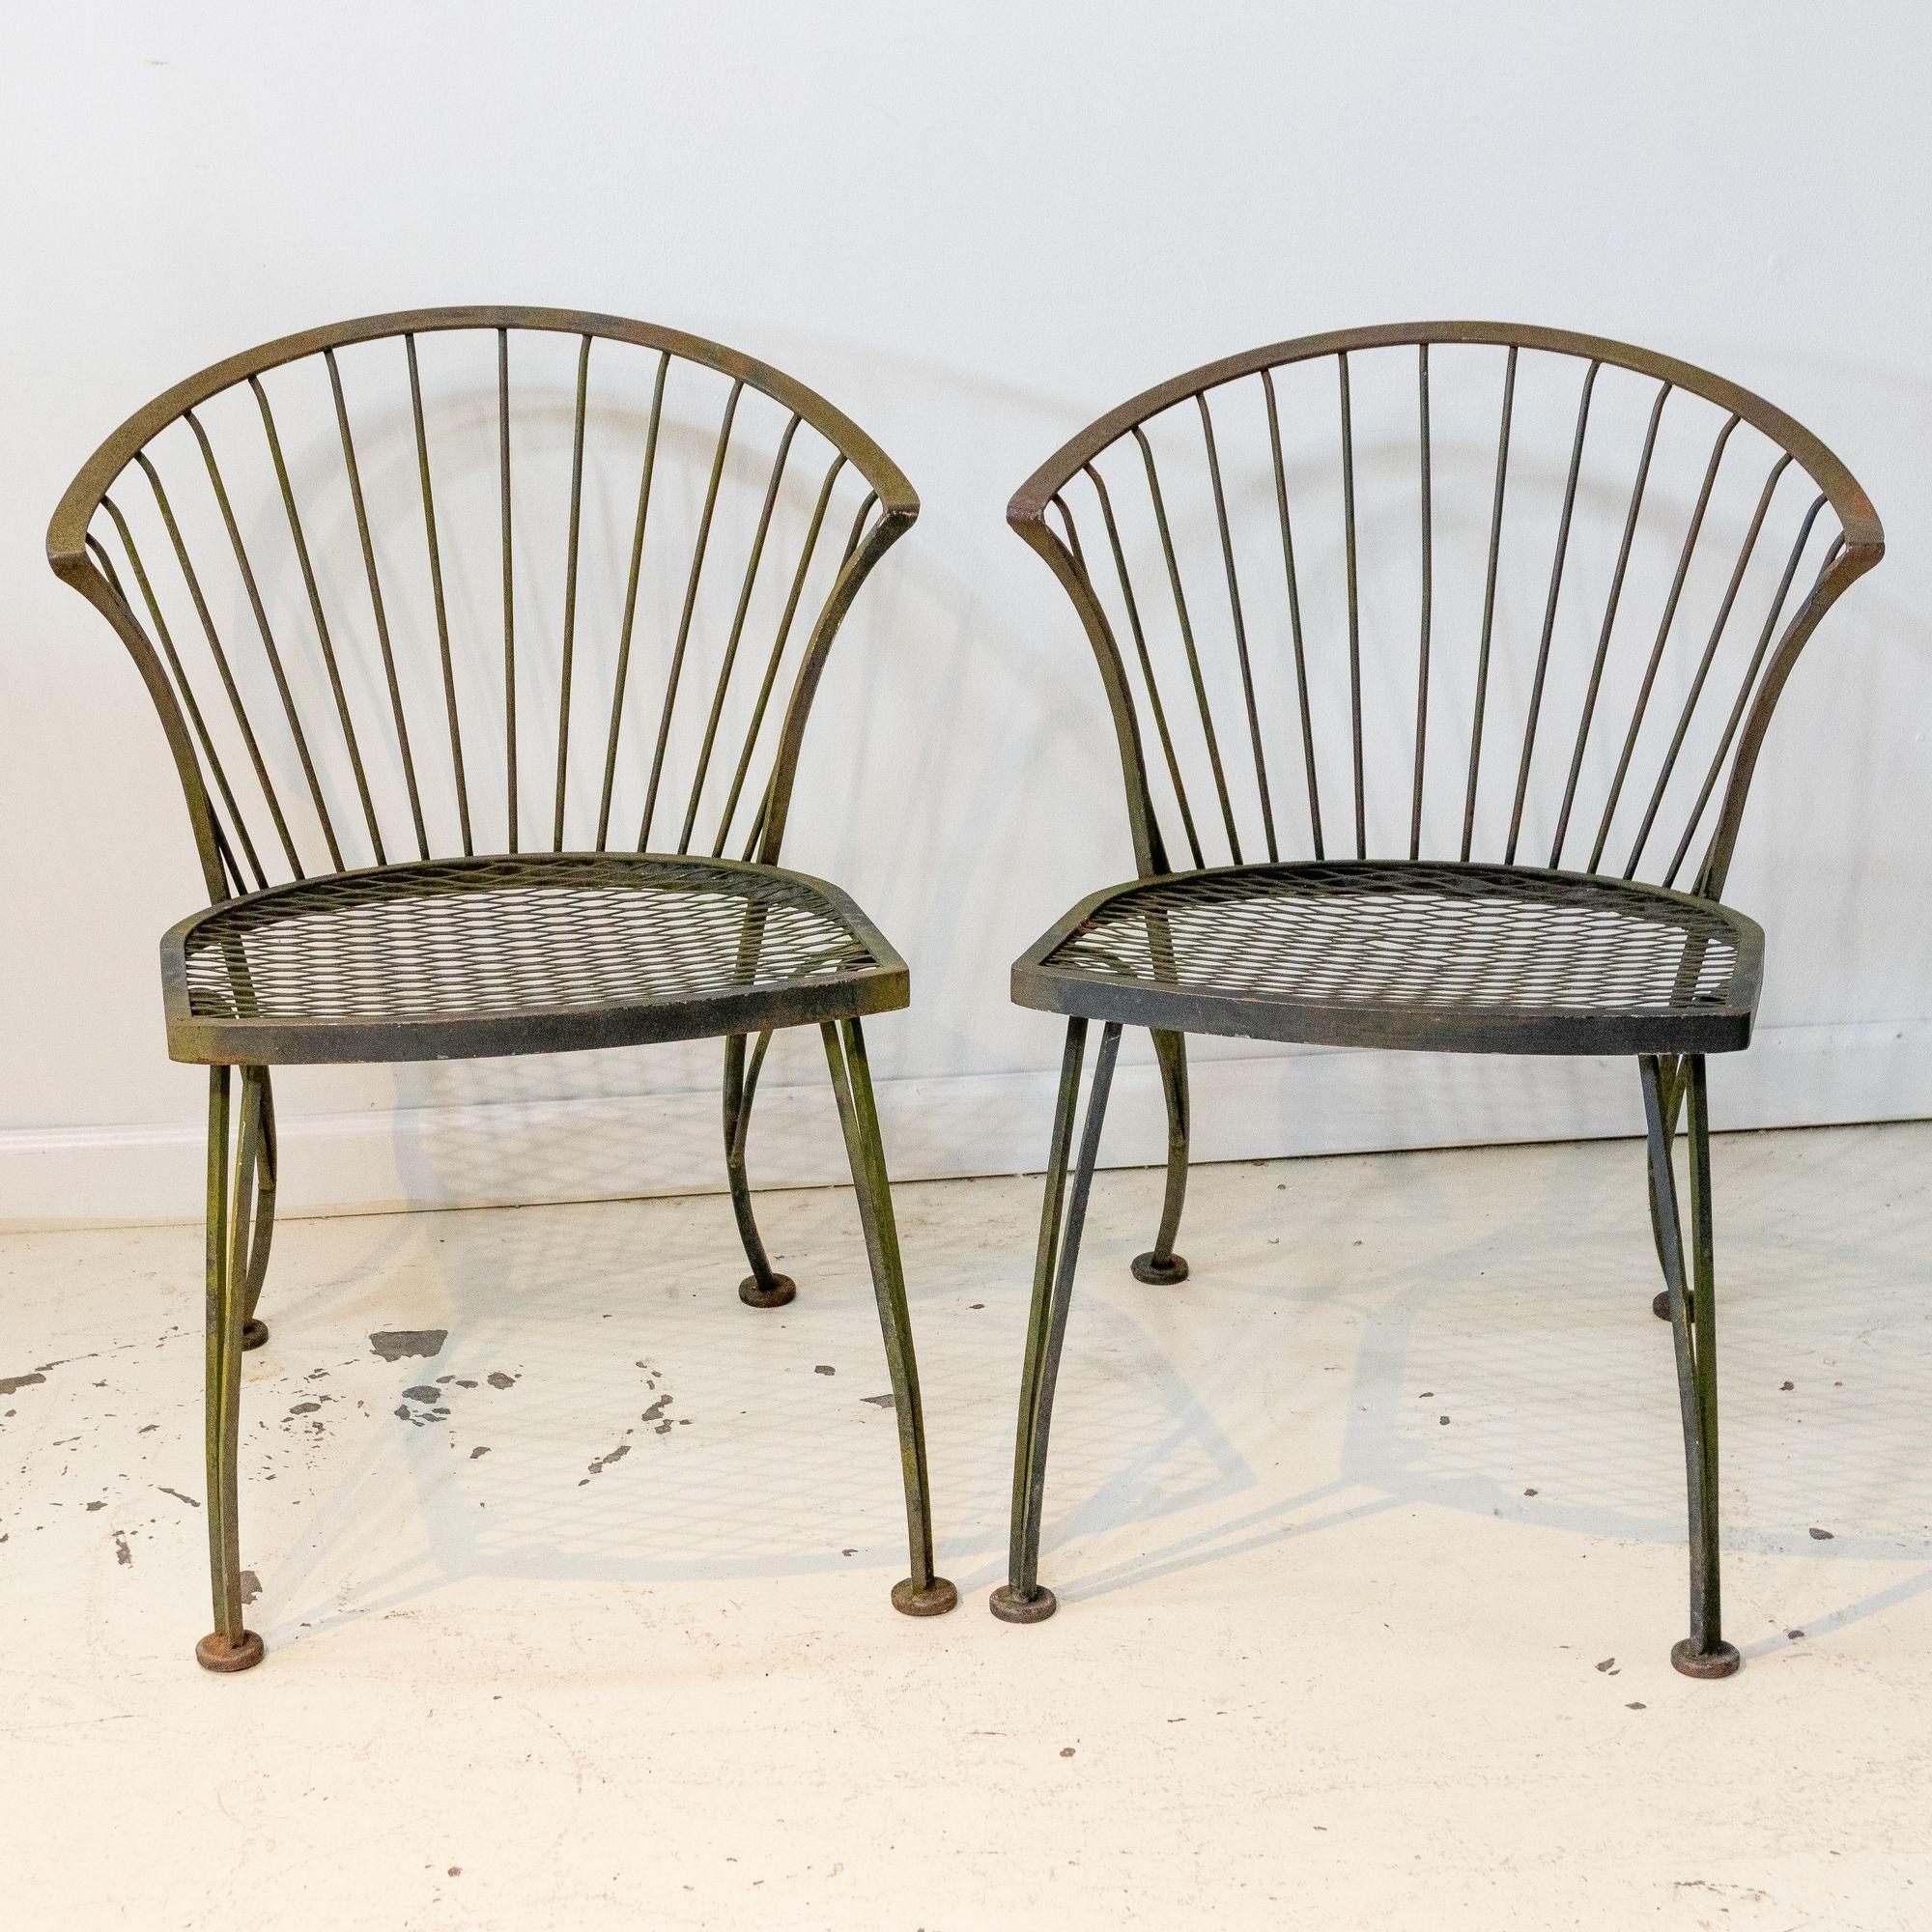 Circa mid-20th century pair of iron garden chairs with curved back and vertical slats. The seat also features a diamond cross hatch pattern. 17